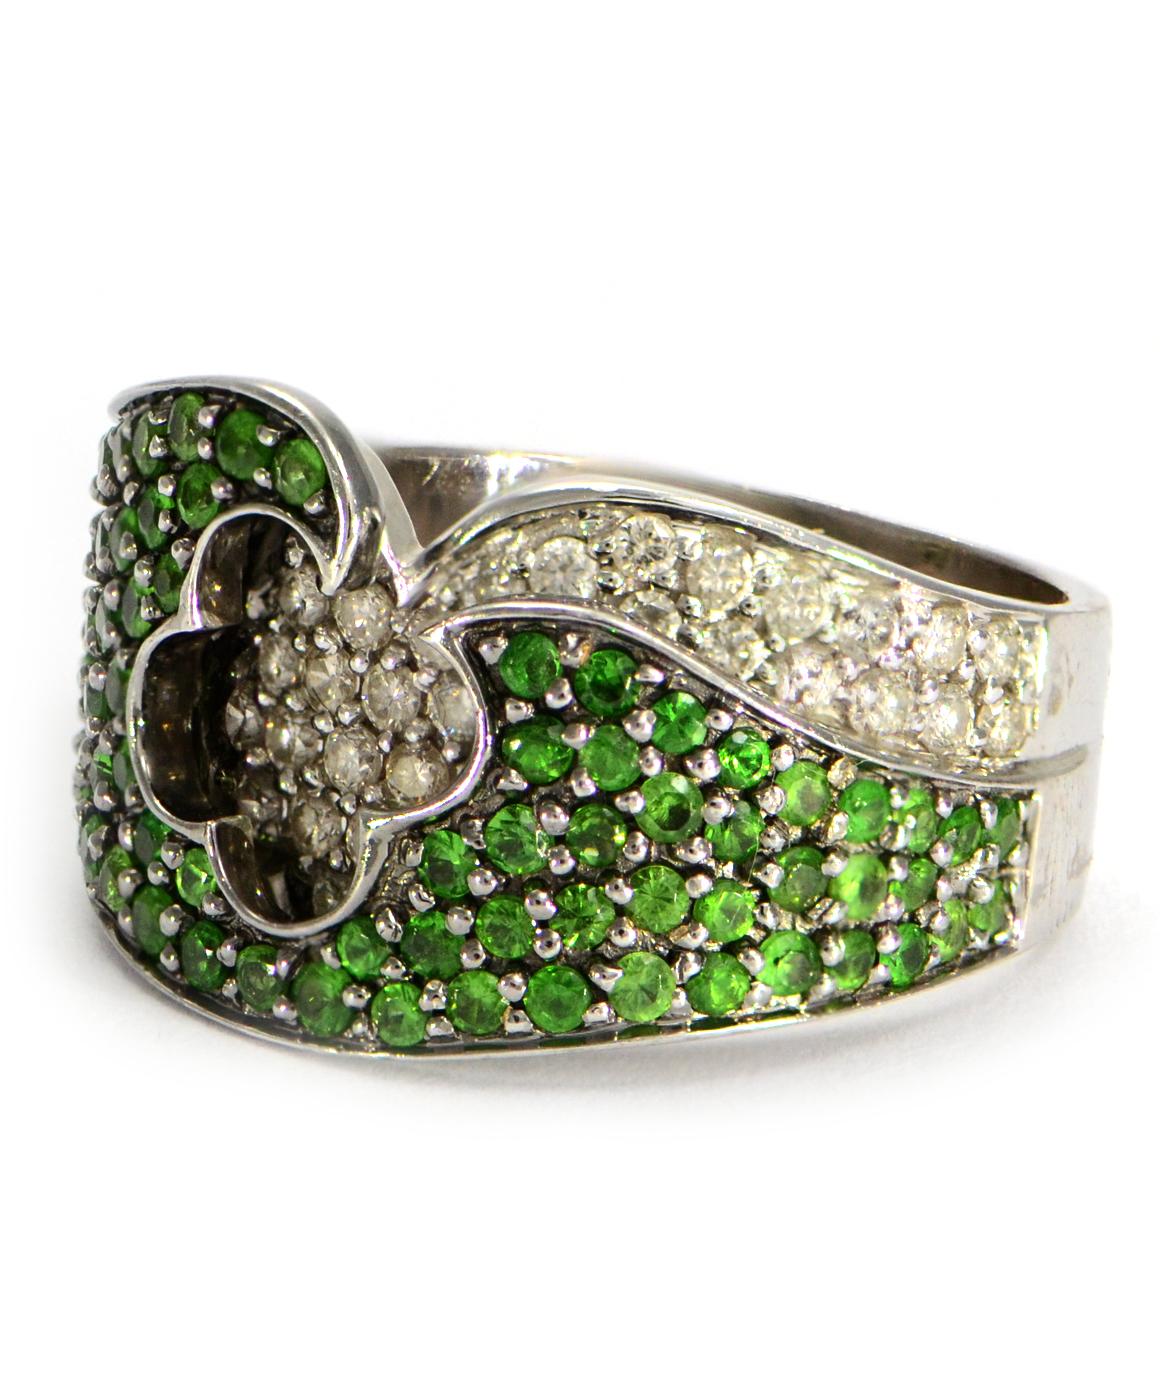 This is a genuine Tsavorite Garnet & natural diamond ring set in solid 14K white gold in excellent condition! There are 85 round tsavorite garnets and 33 round brilliant diamonds weighing approximately 1.00CTTW. The Diamonds are H SI1. The ring is a